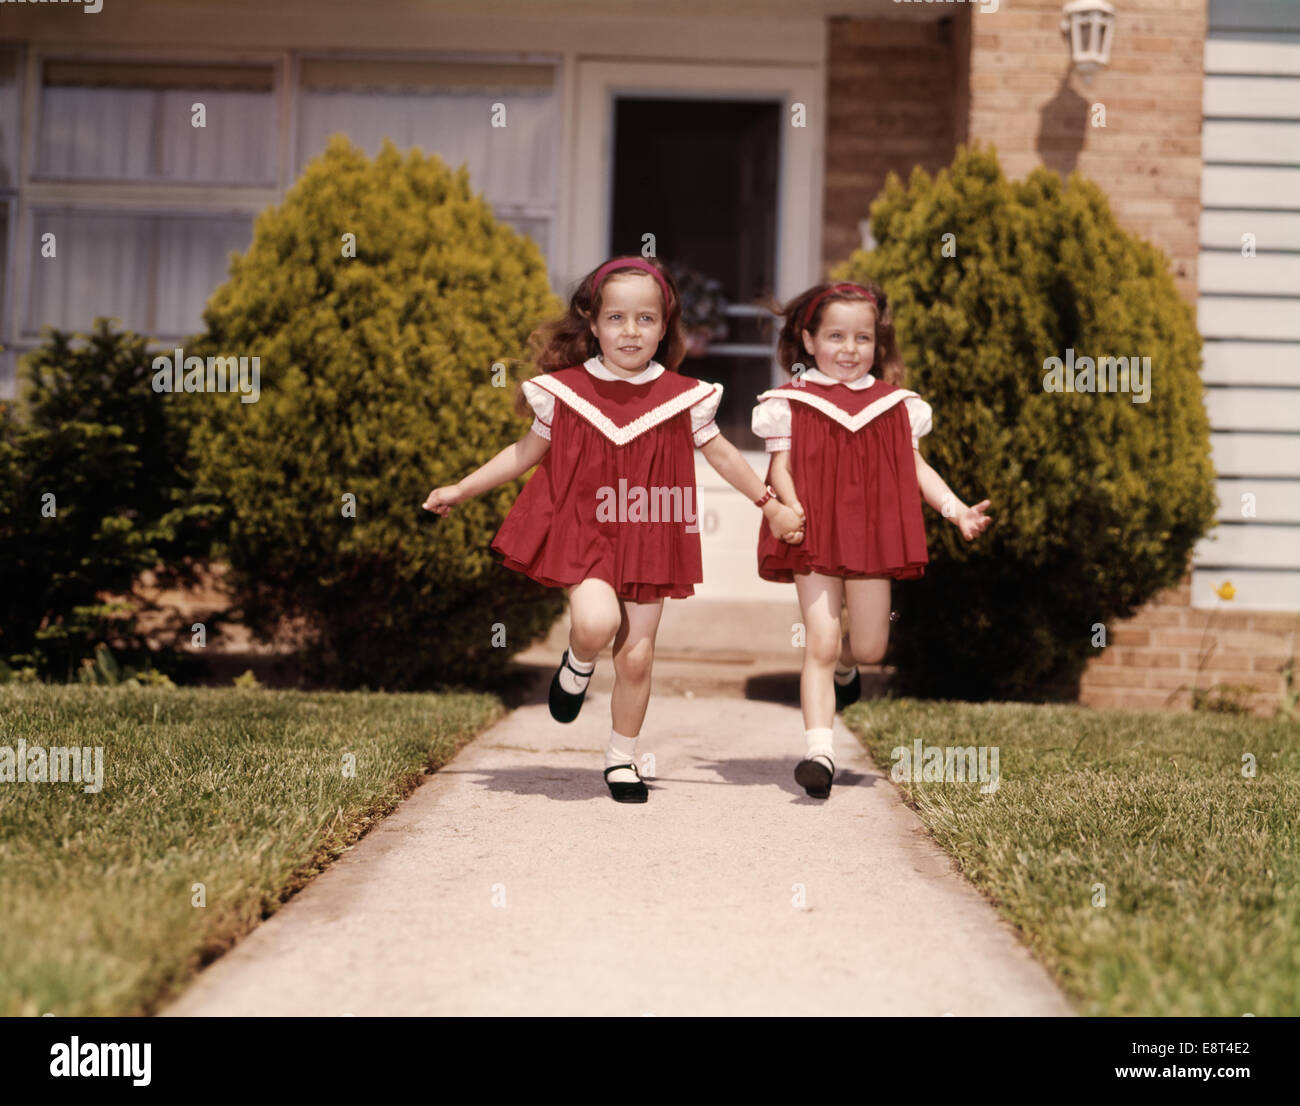 1960s TWIN GIRLS WEARING IDENTICAL RED DRESSES HOLDING HANDS RUNNING DOWN SIDEWALK OF SUBURBAN HOUSE LOOKING AT CAMERA Stock Photo